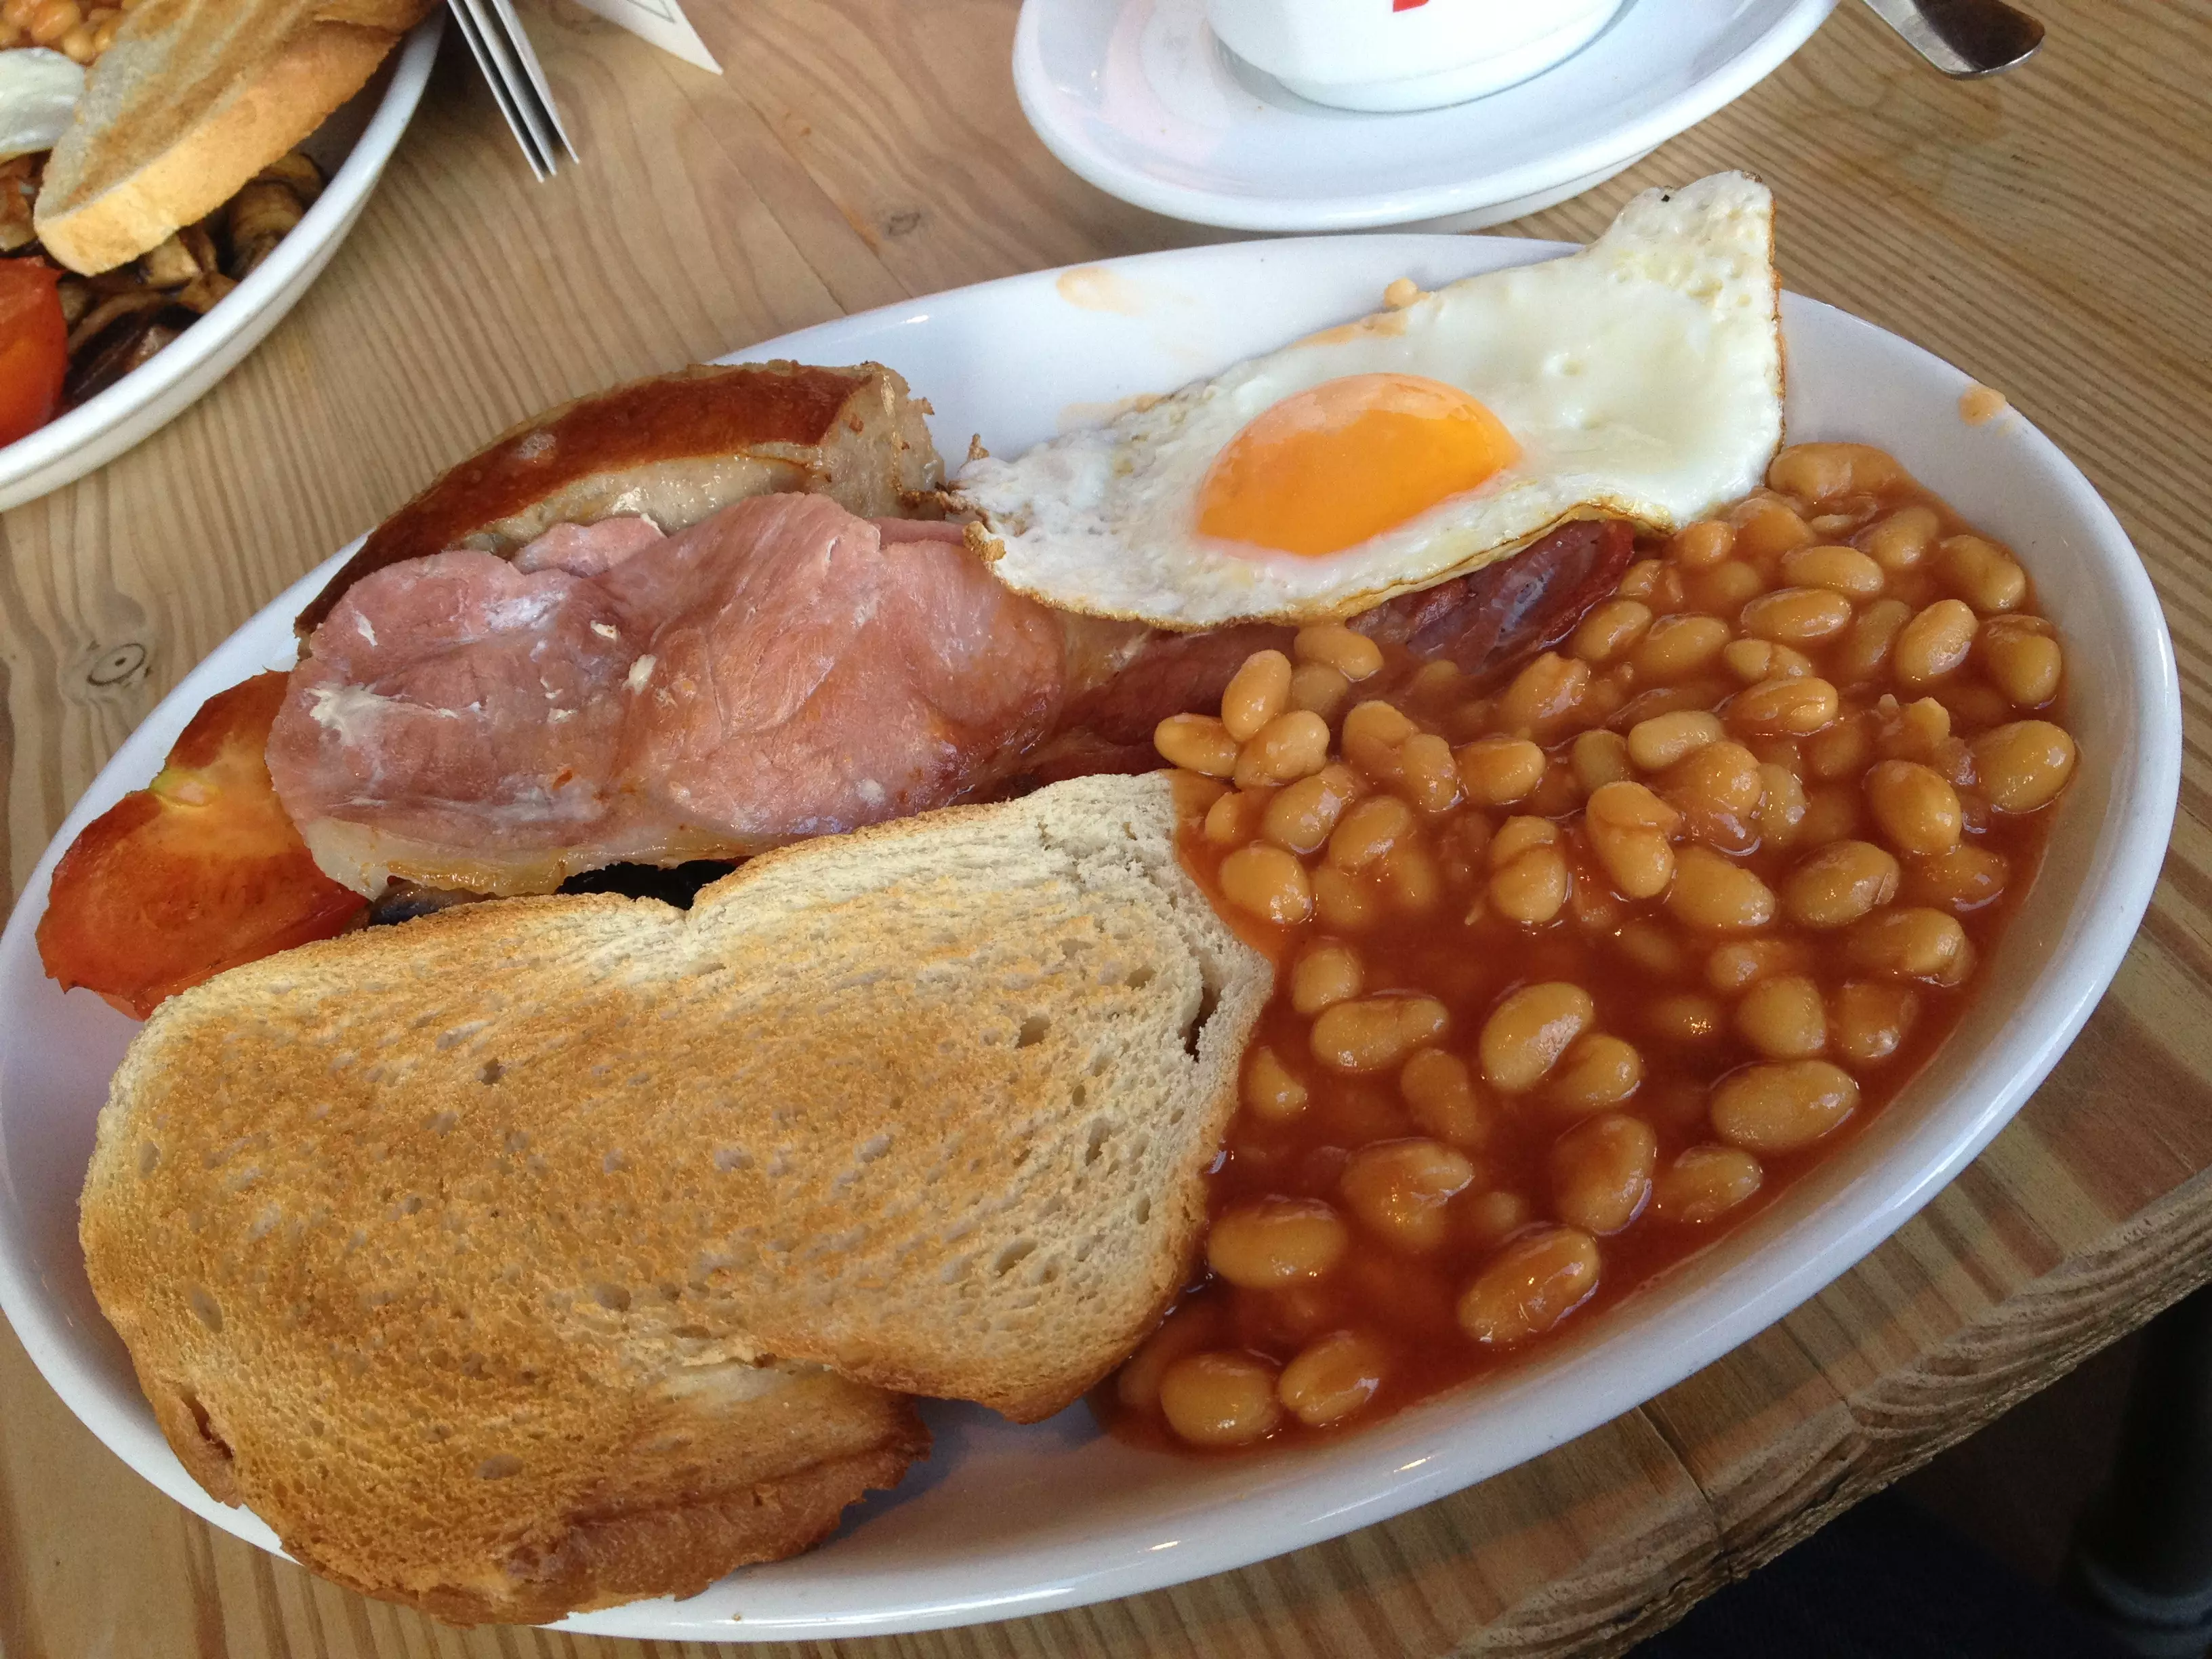 The six-piece brekkie will set you back £1.75.